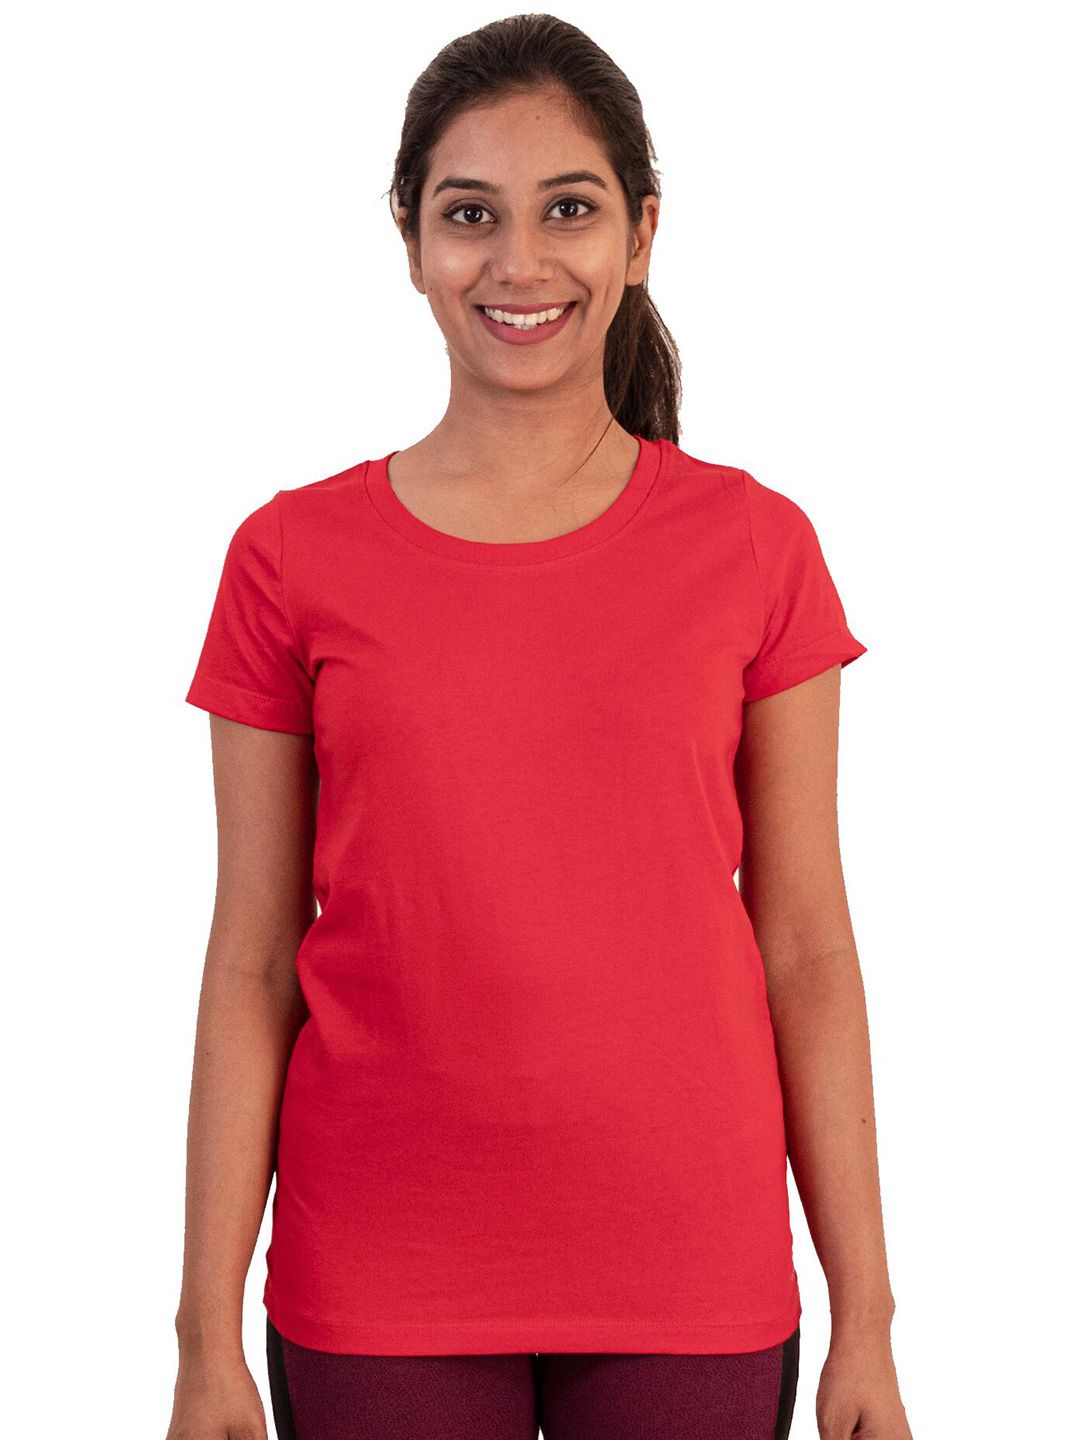 NYAMBA By Decathlon Women Round Neck Red Pure Cotton T-shirt Price in India